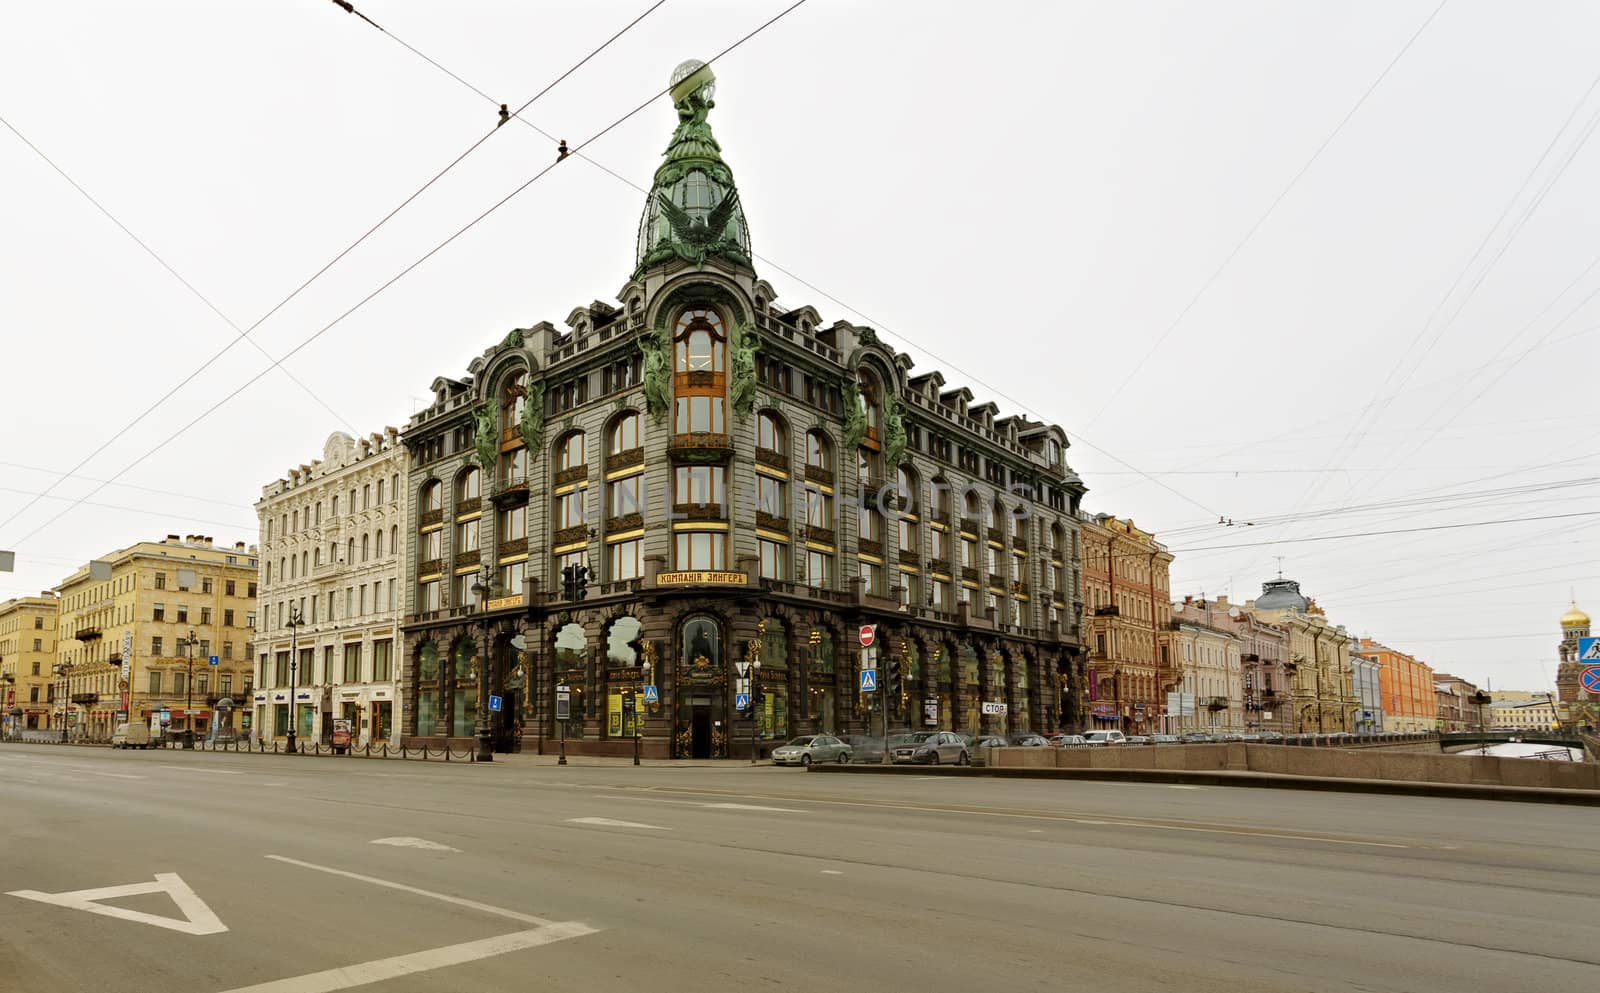 Zinger's house («House of books»). St.Petersburg, Russia